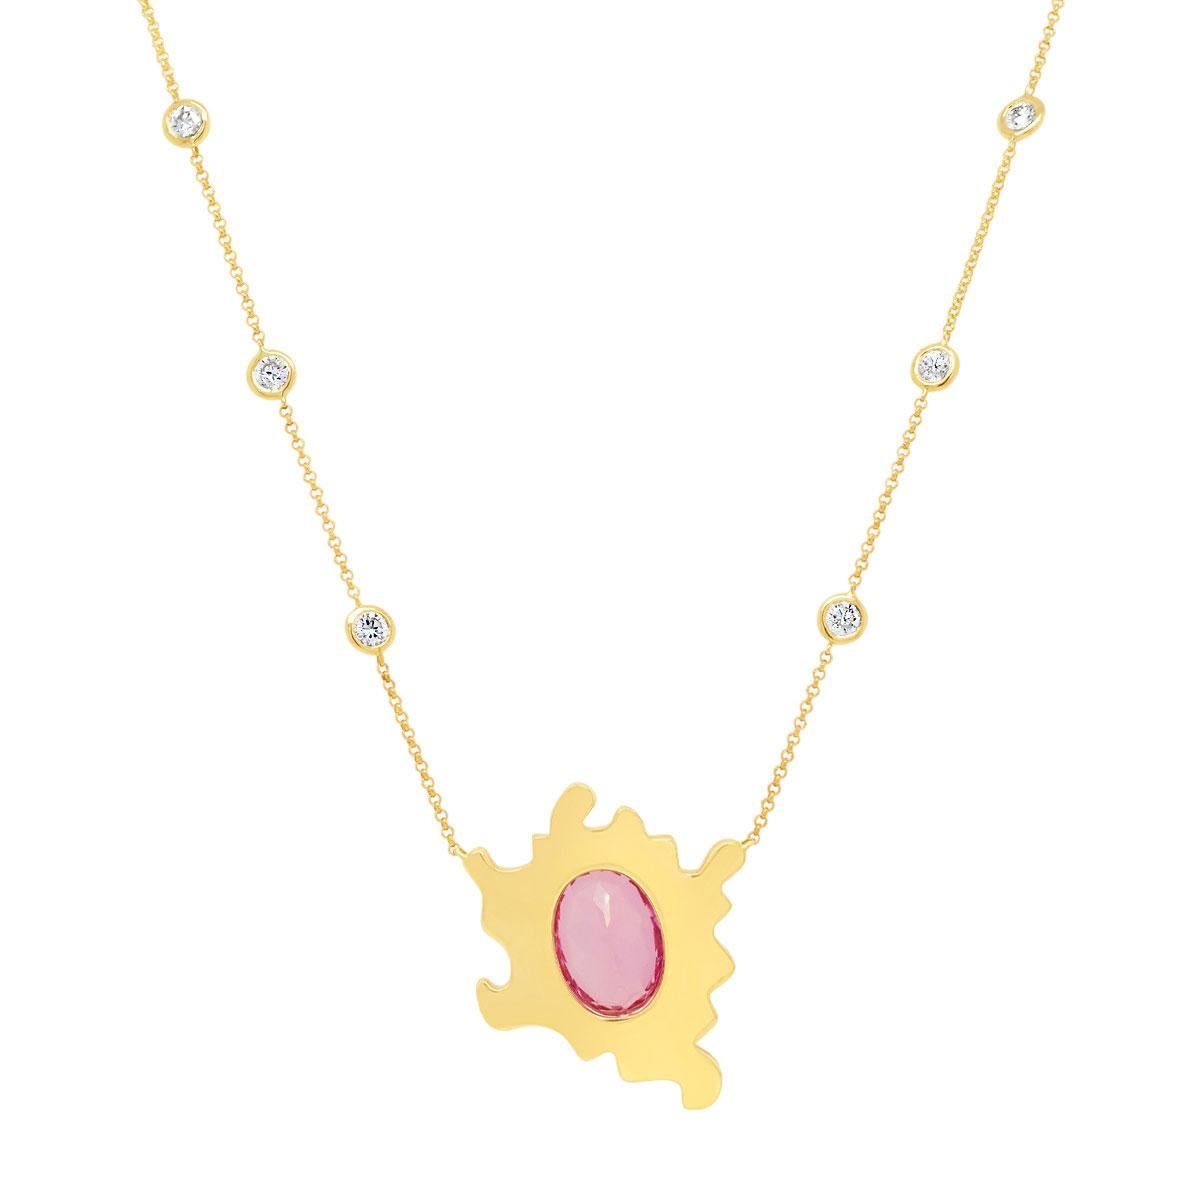 ake a trip. This one of a kind necklace, featuring an oval shaped pink tourmaline and pink enamel, is designed to challenge what we consider 